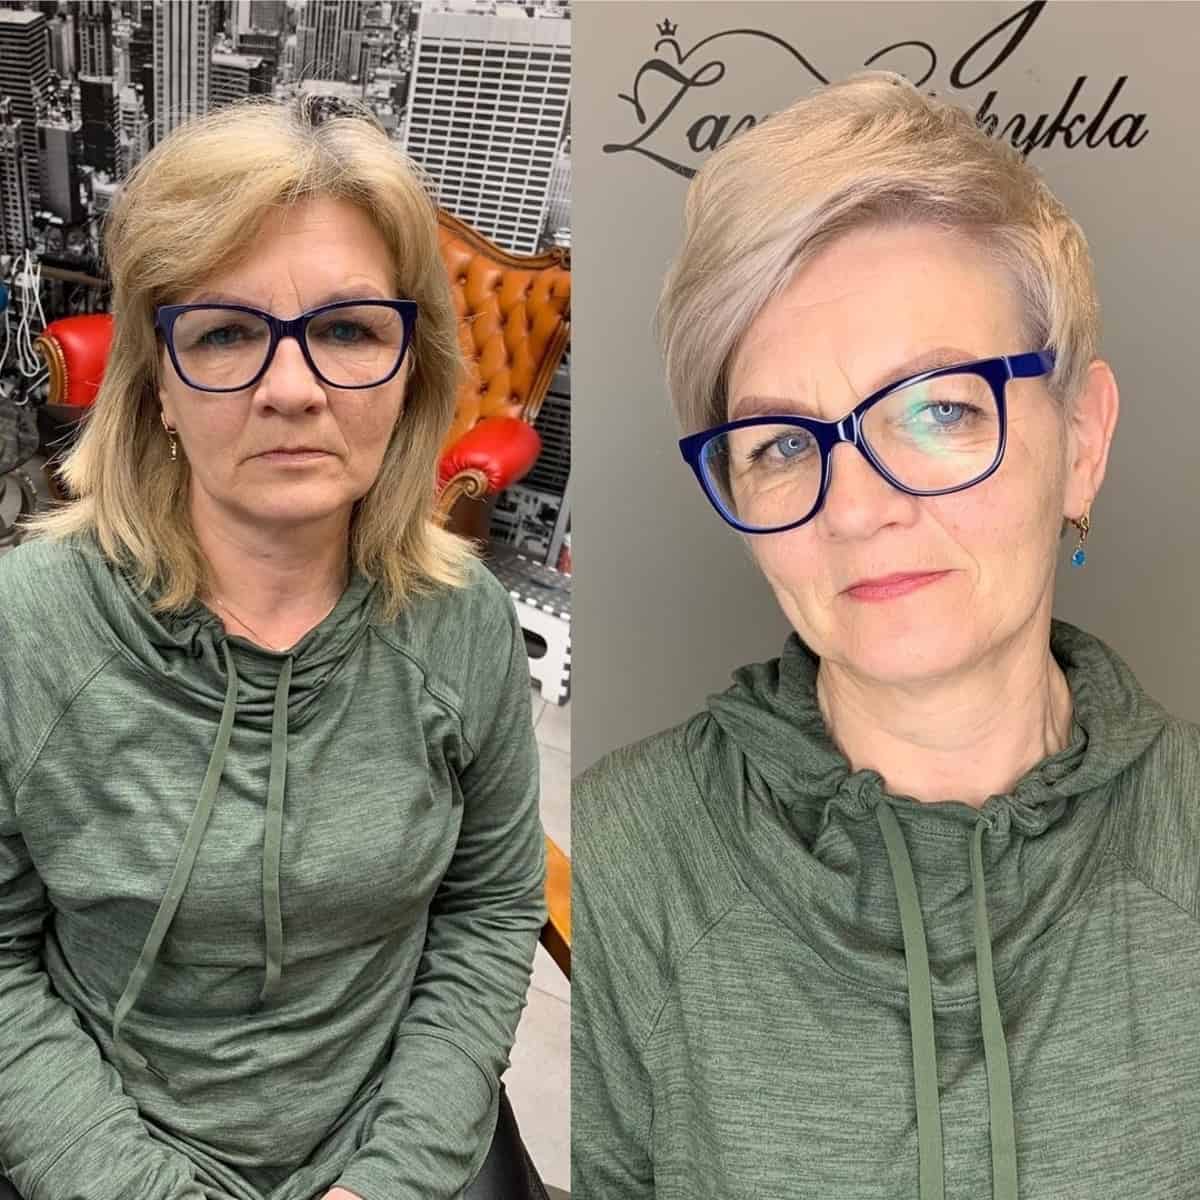 Very Short Pixie for Women in Their 70s